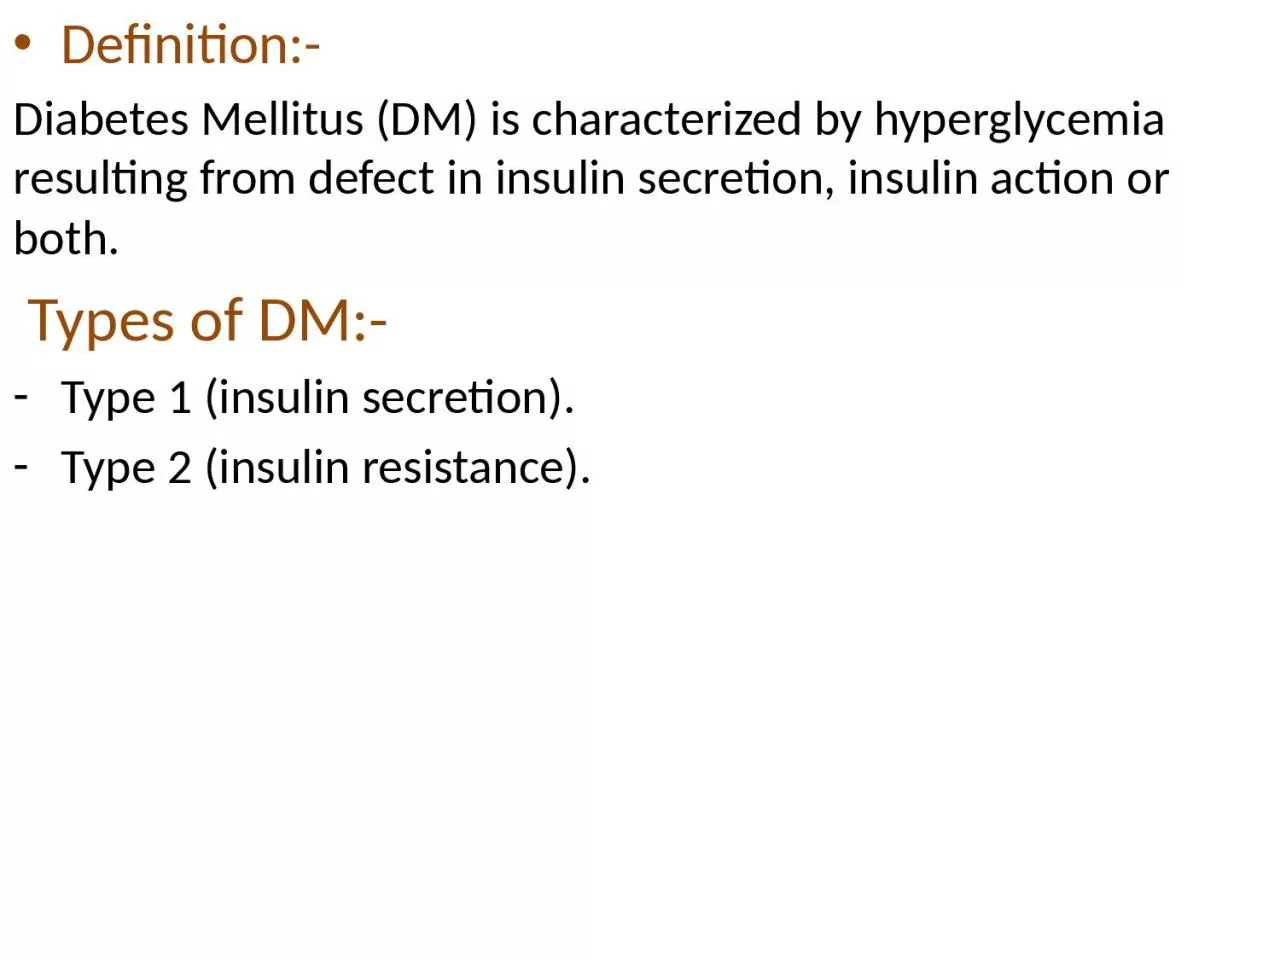 Definition:- Diabetes Mellitus (DM) is characterized by hyperglycemia resulting from defect